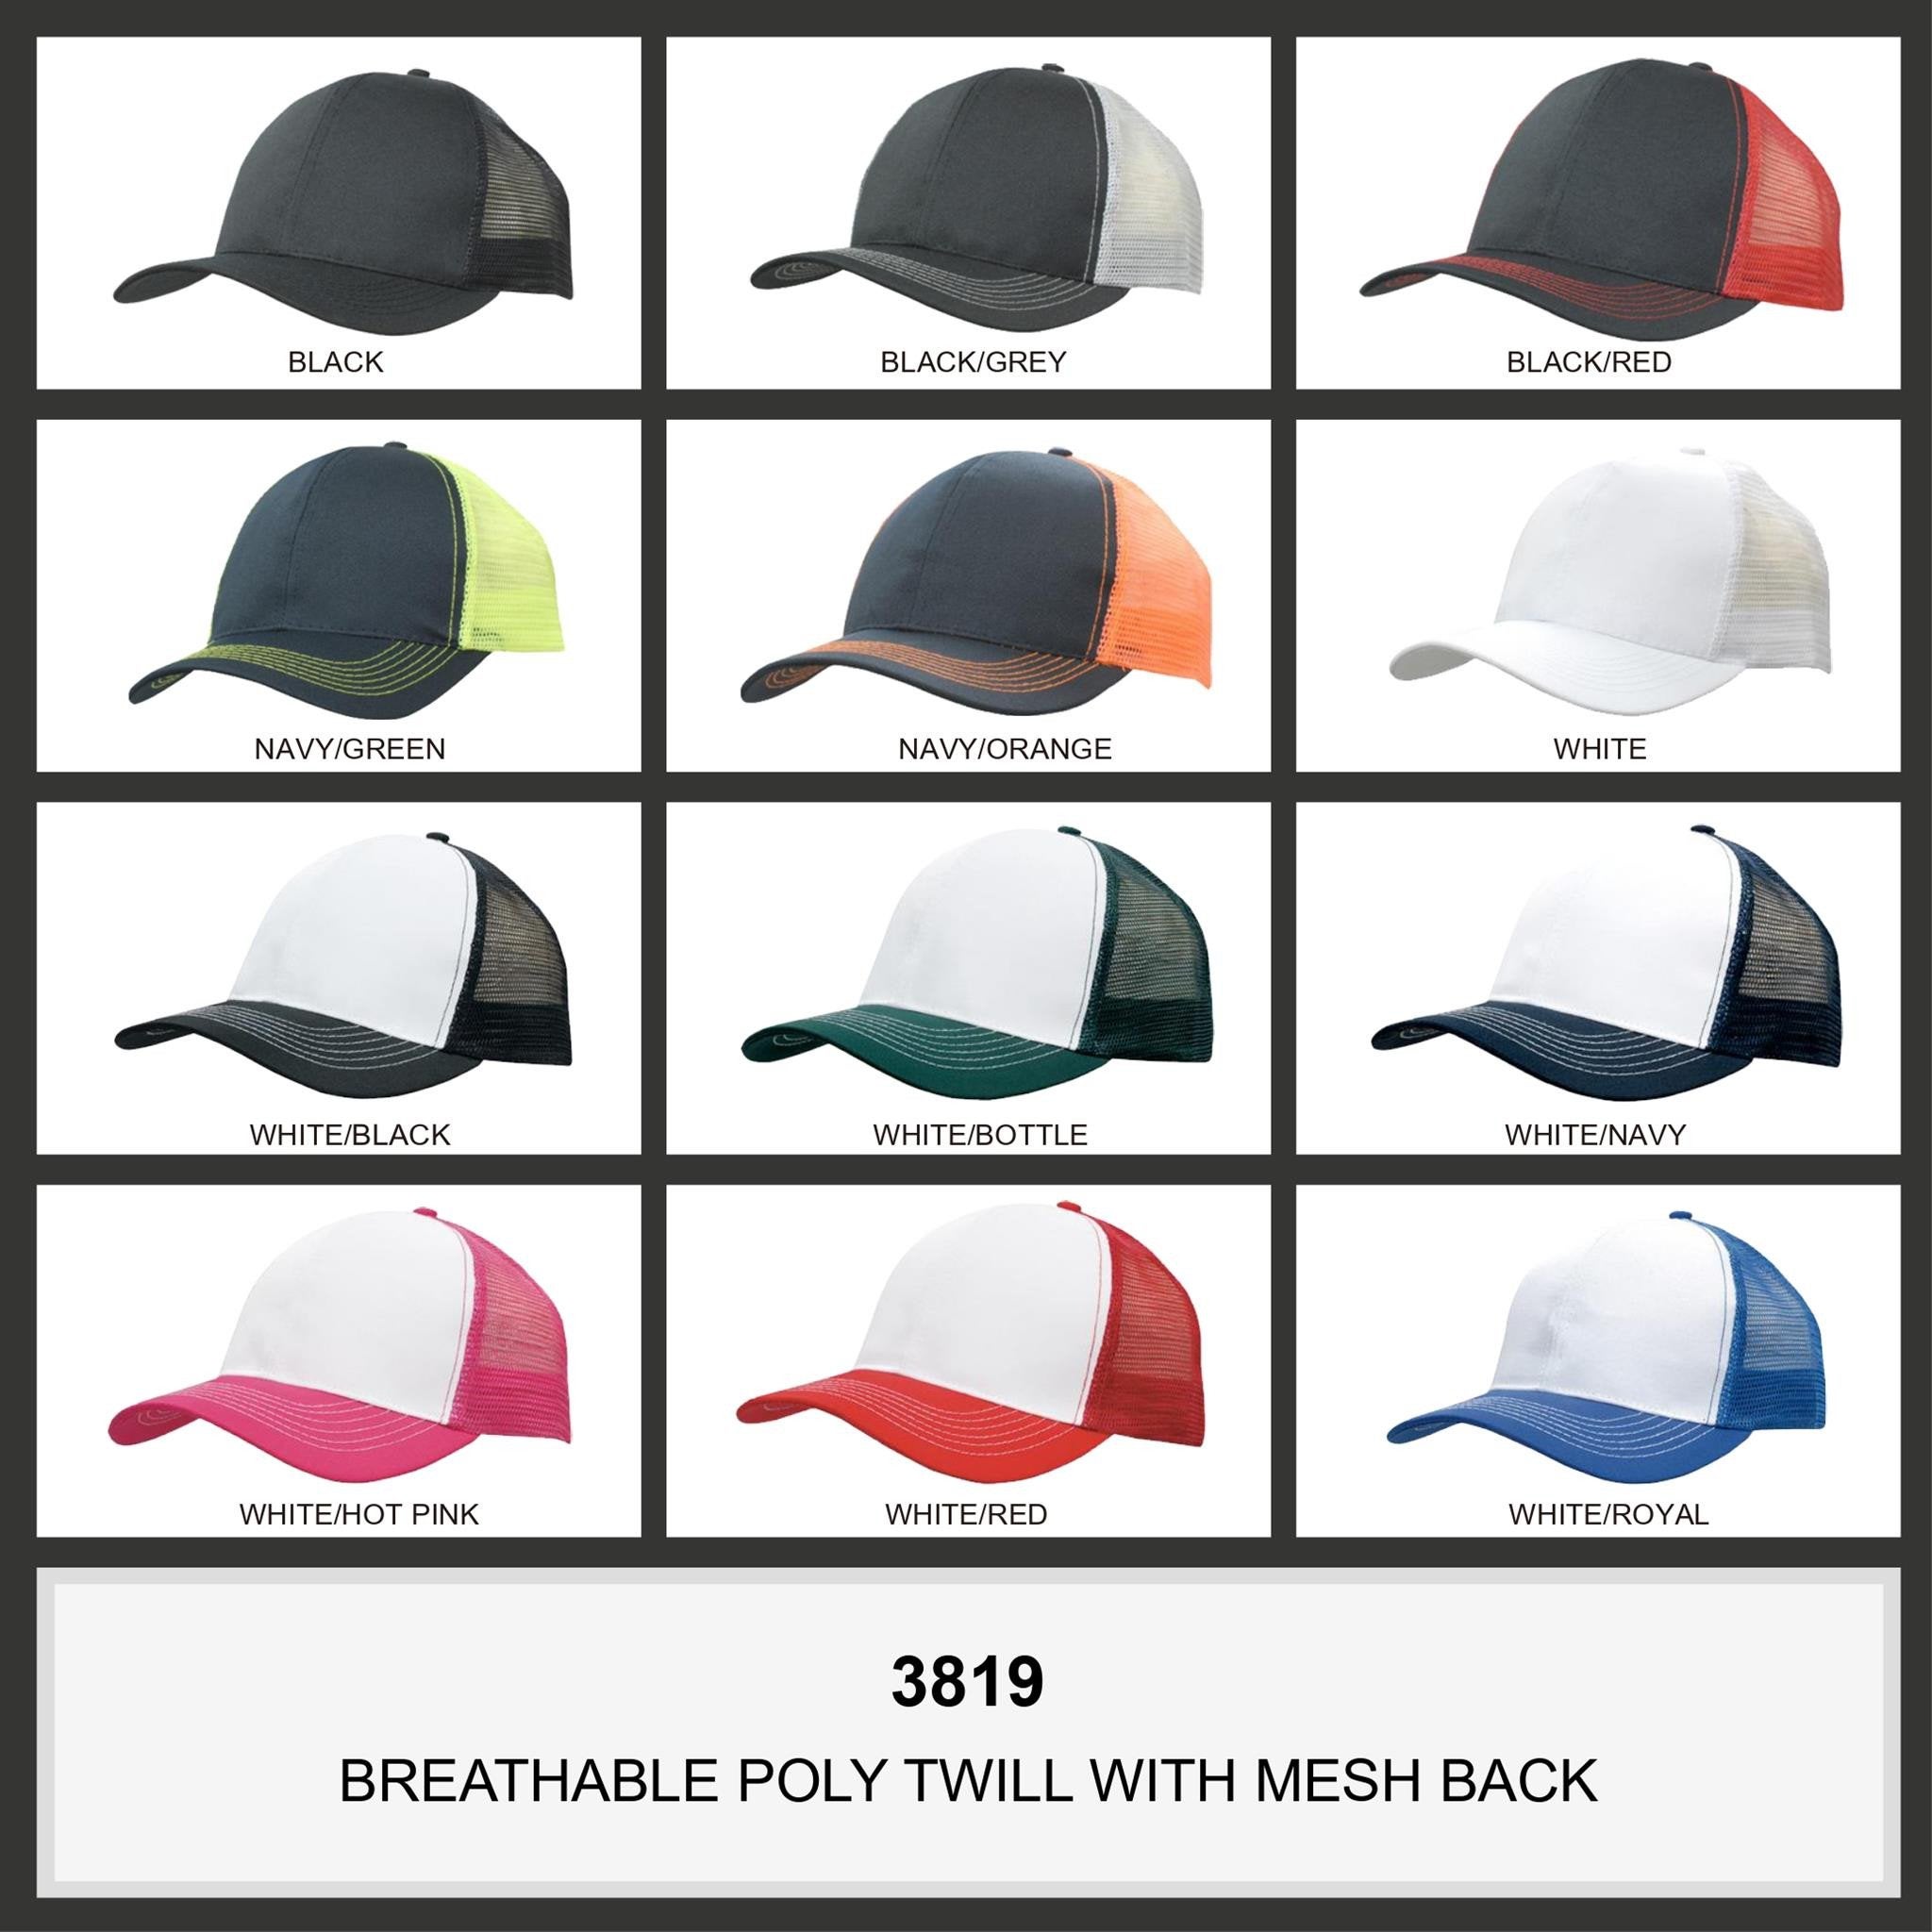 Breathable Poly Twill Cap With Mesh Back